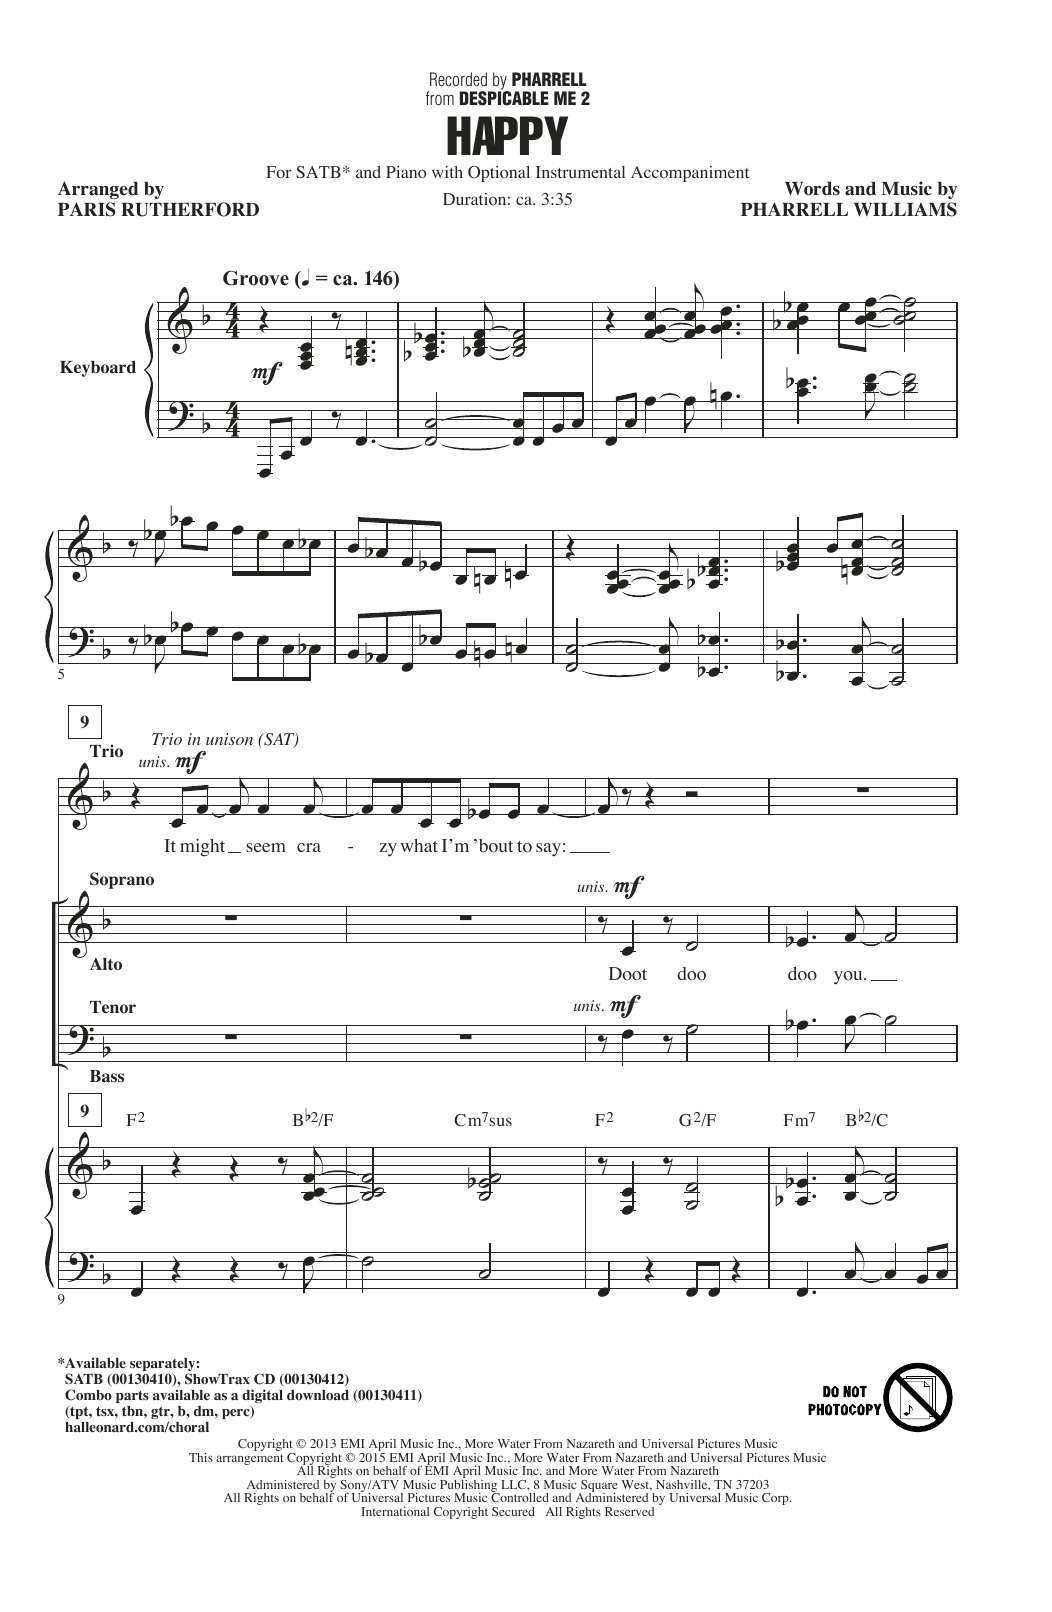 Download Pharrell Williams Happy (Arr. Paris Rutherford) Sheet Music